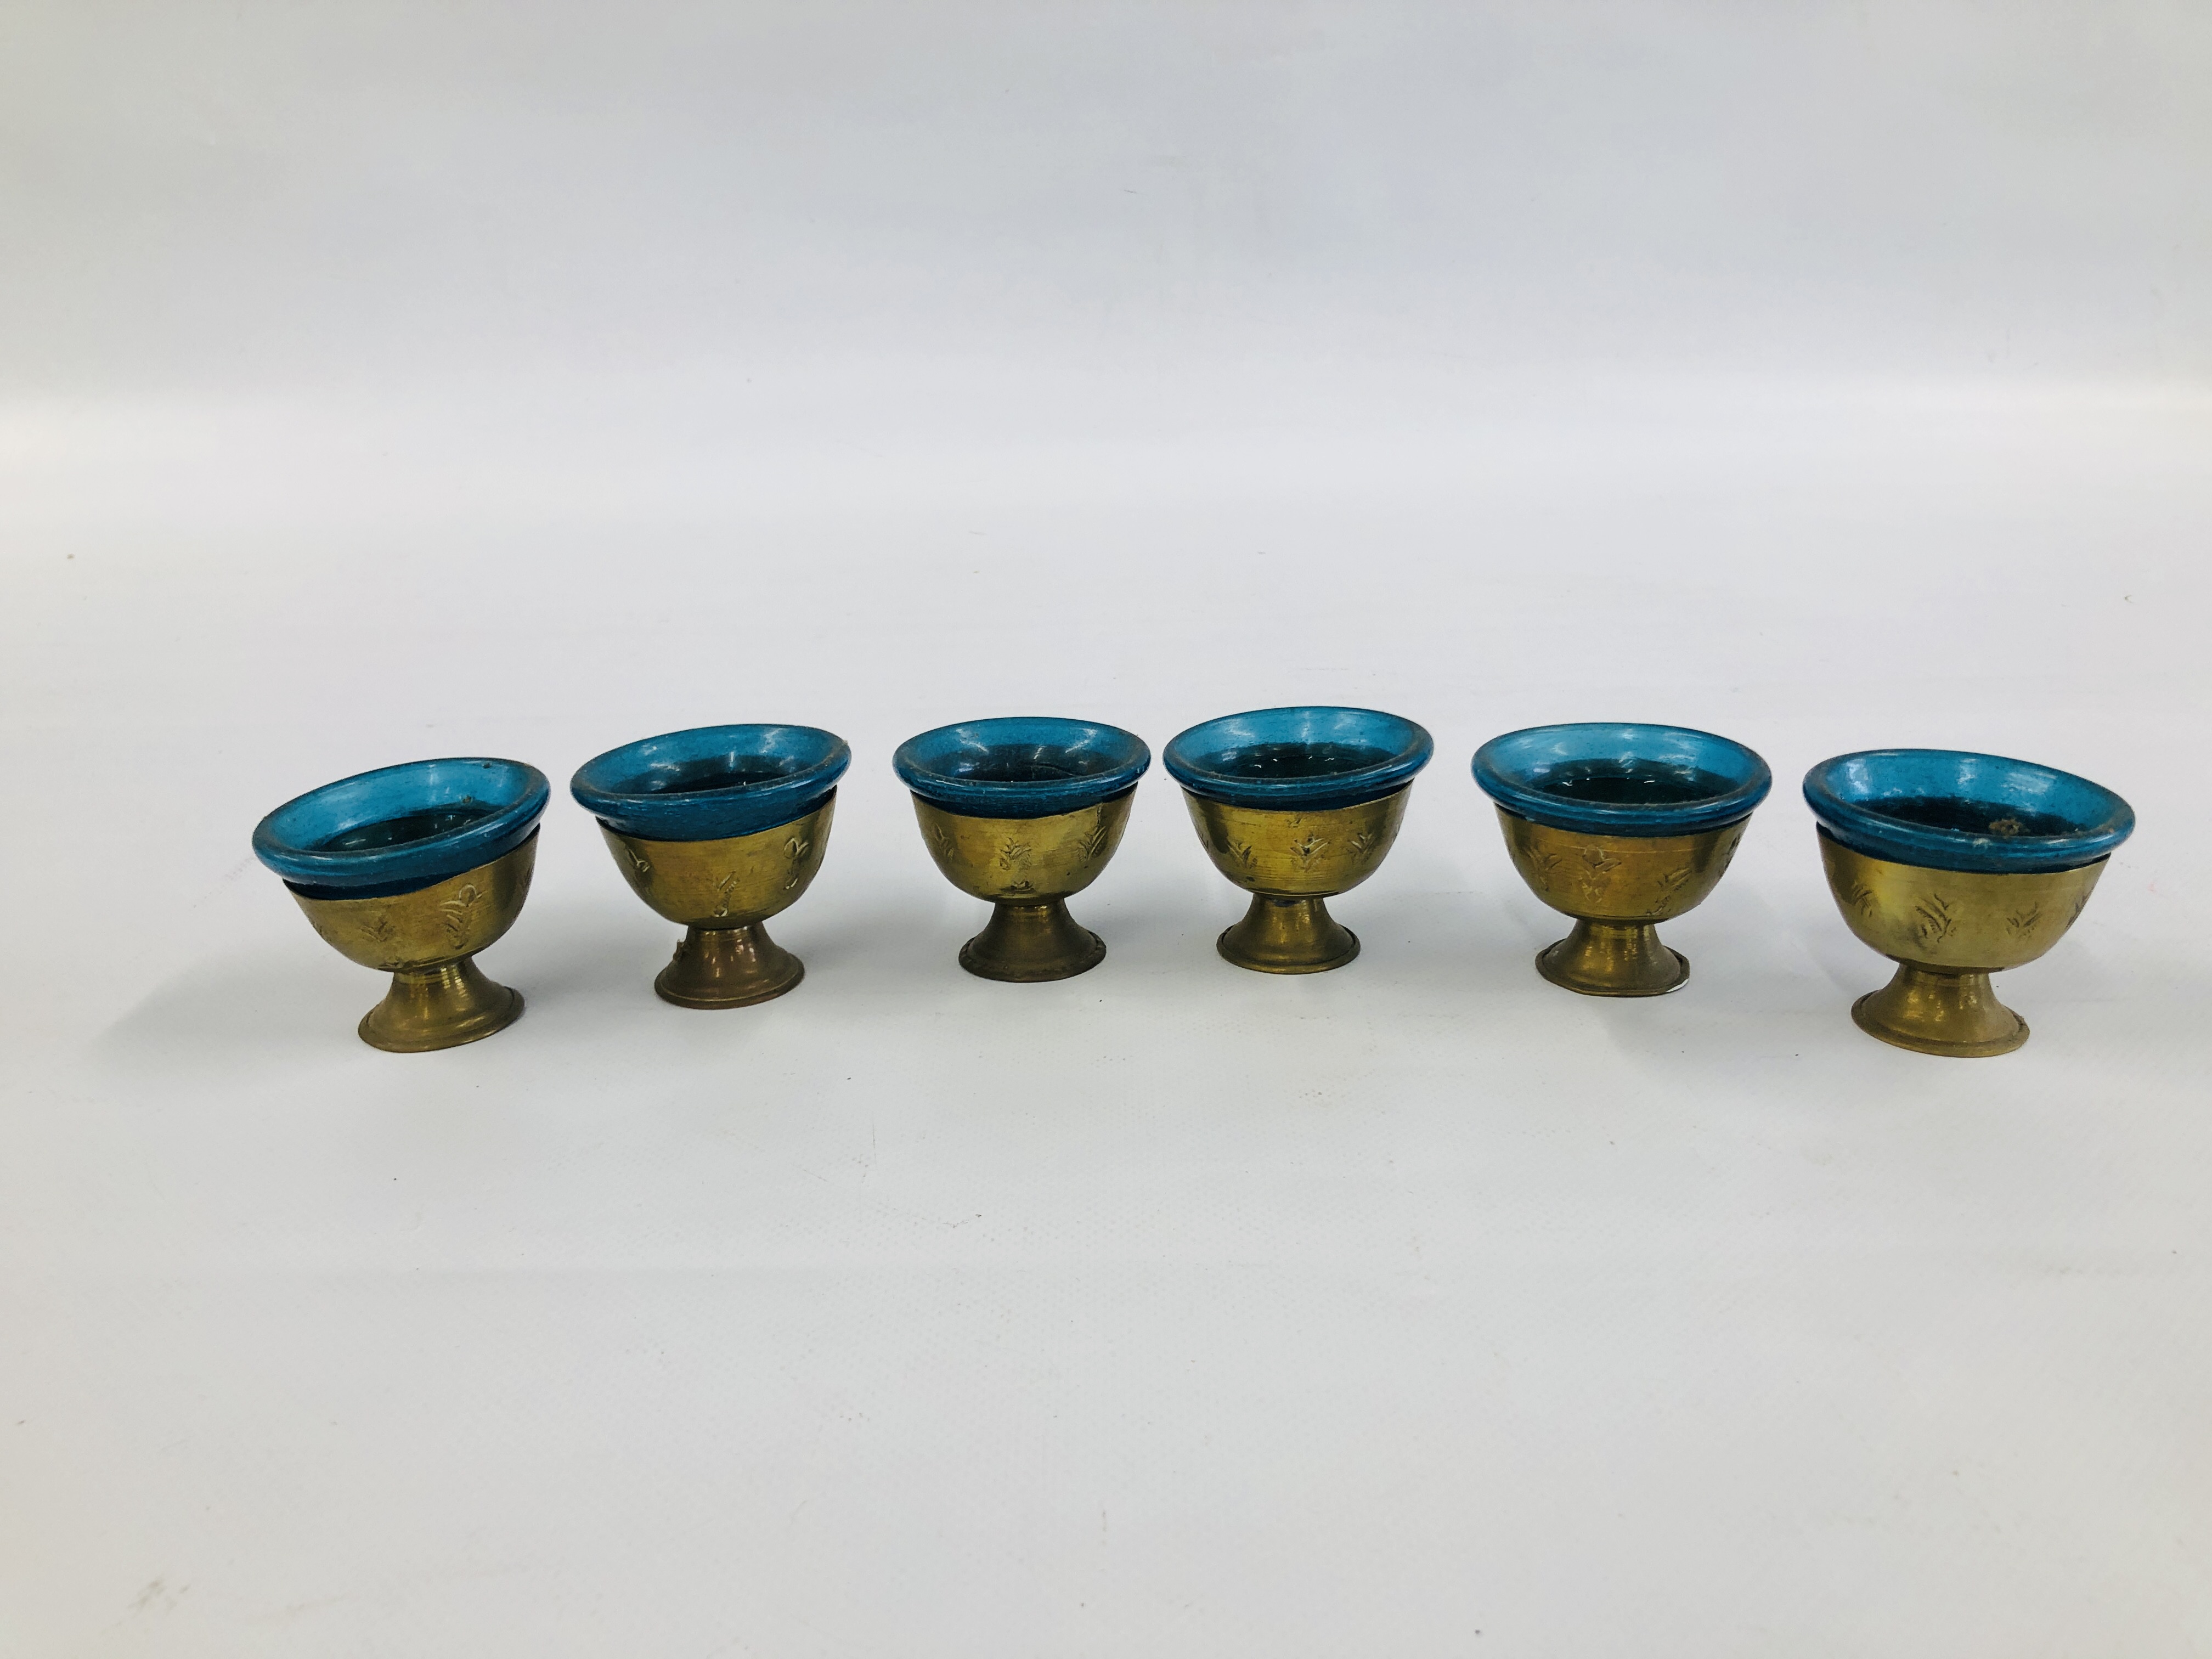 A SET OF SIX MIDDLE EASTERN BRASS GOBLET VESSELS WITH BLUE GLASS LINERS.